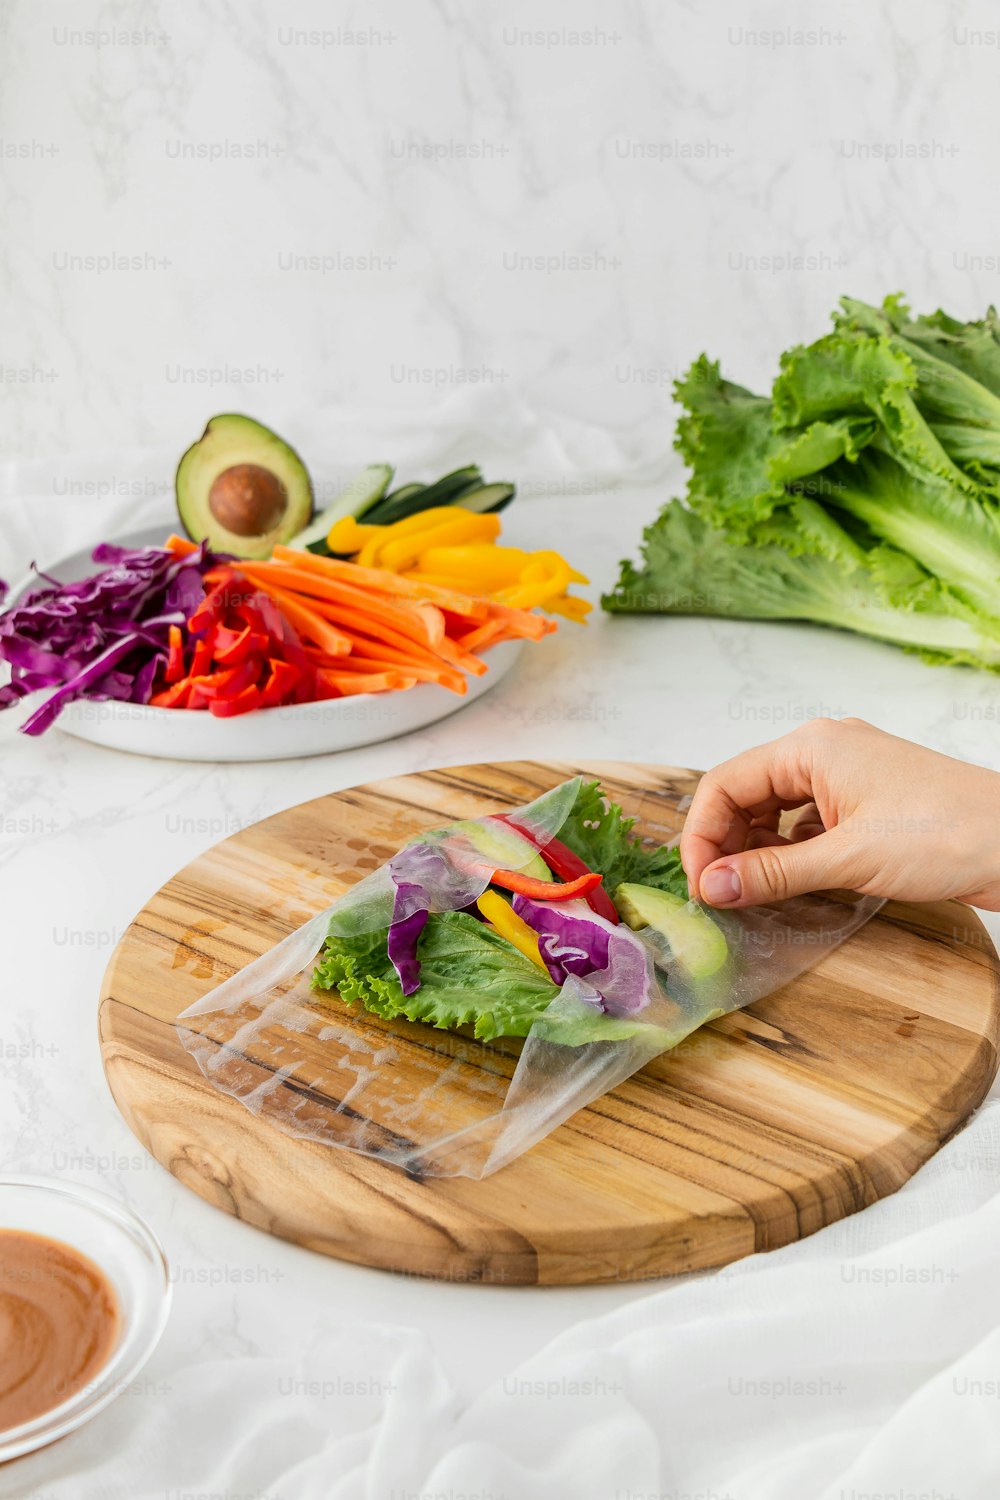 a person cutting up a salad on a cutting board